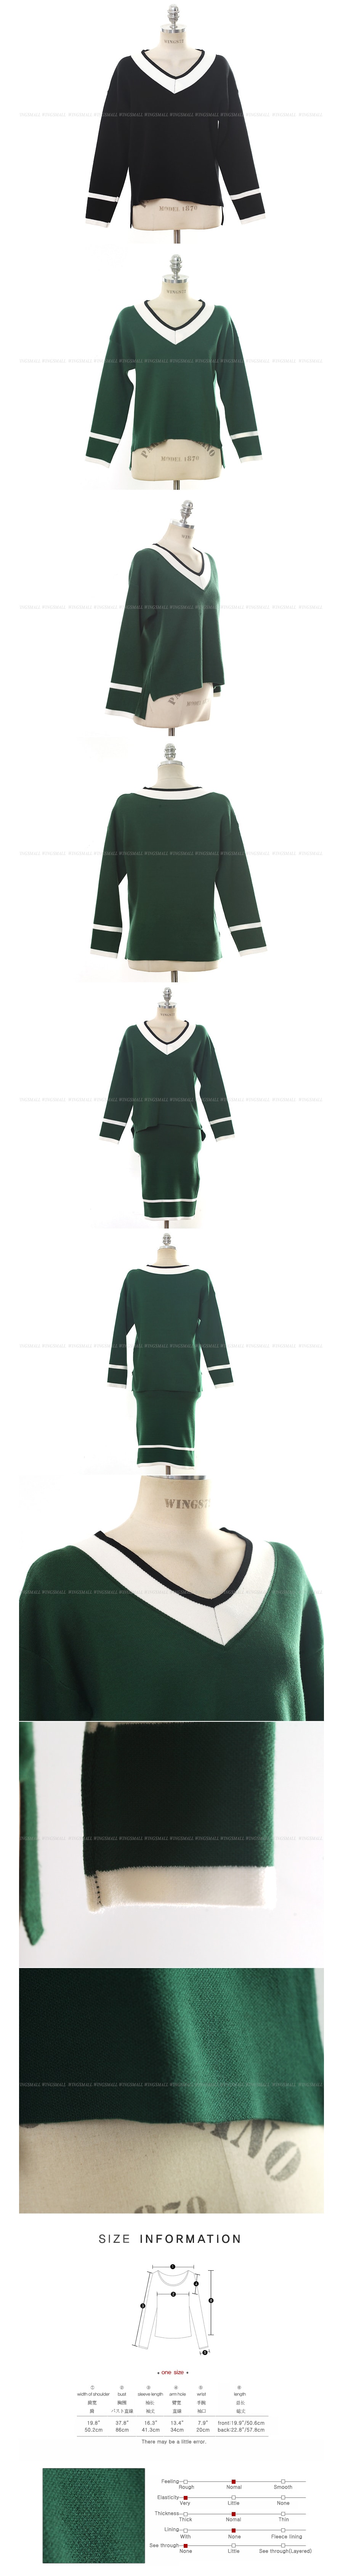 [Autumn New] V-Neck Color Block Knit Top and Skirt 2 Pieces Set Black One Size(S-M)